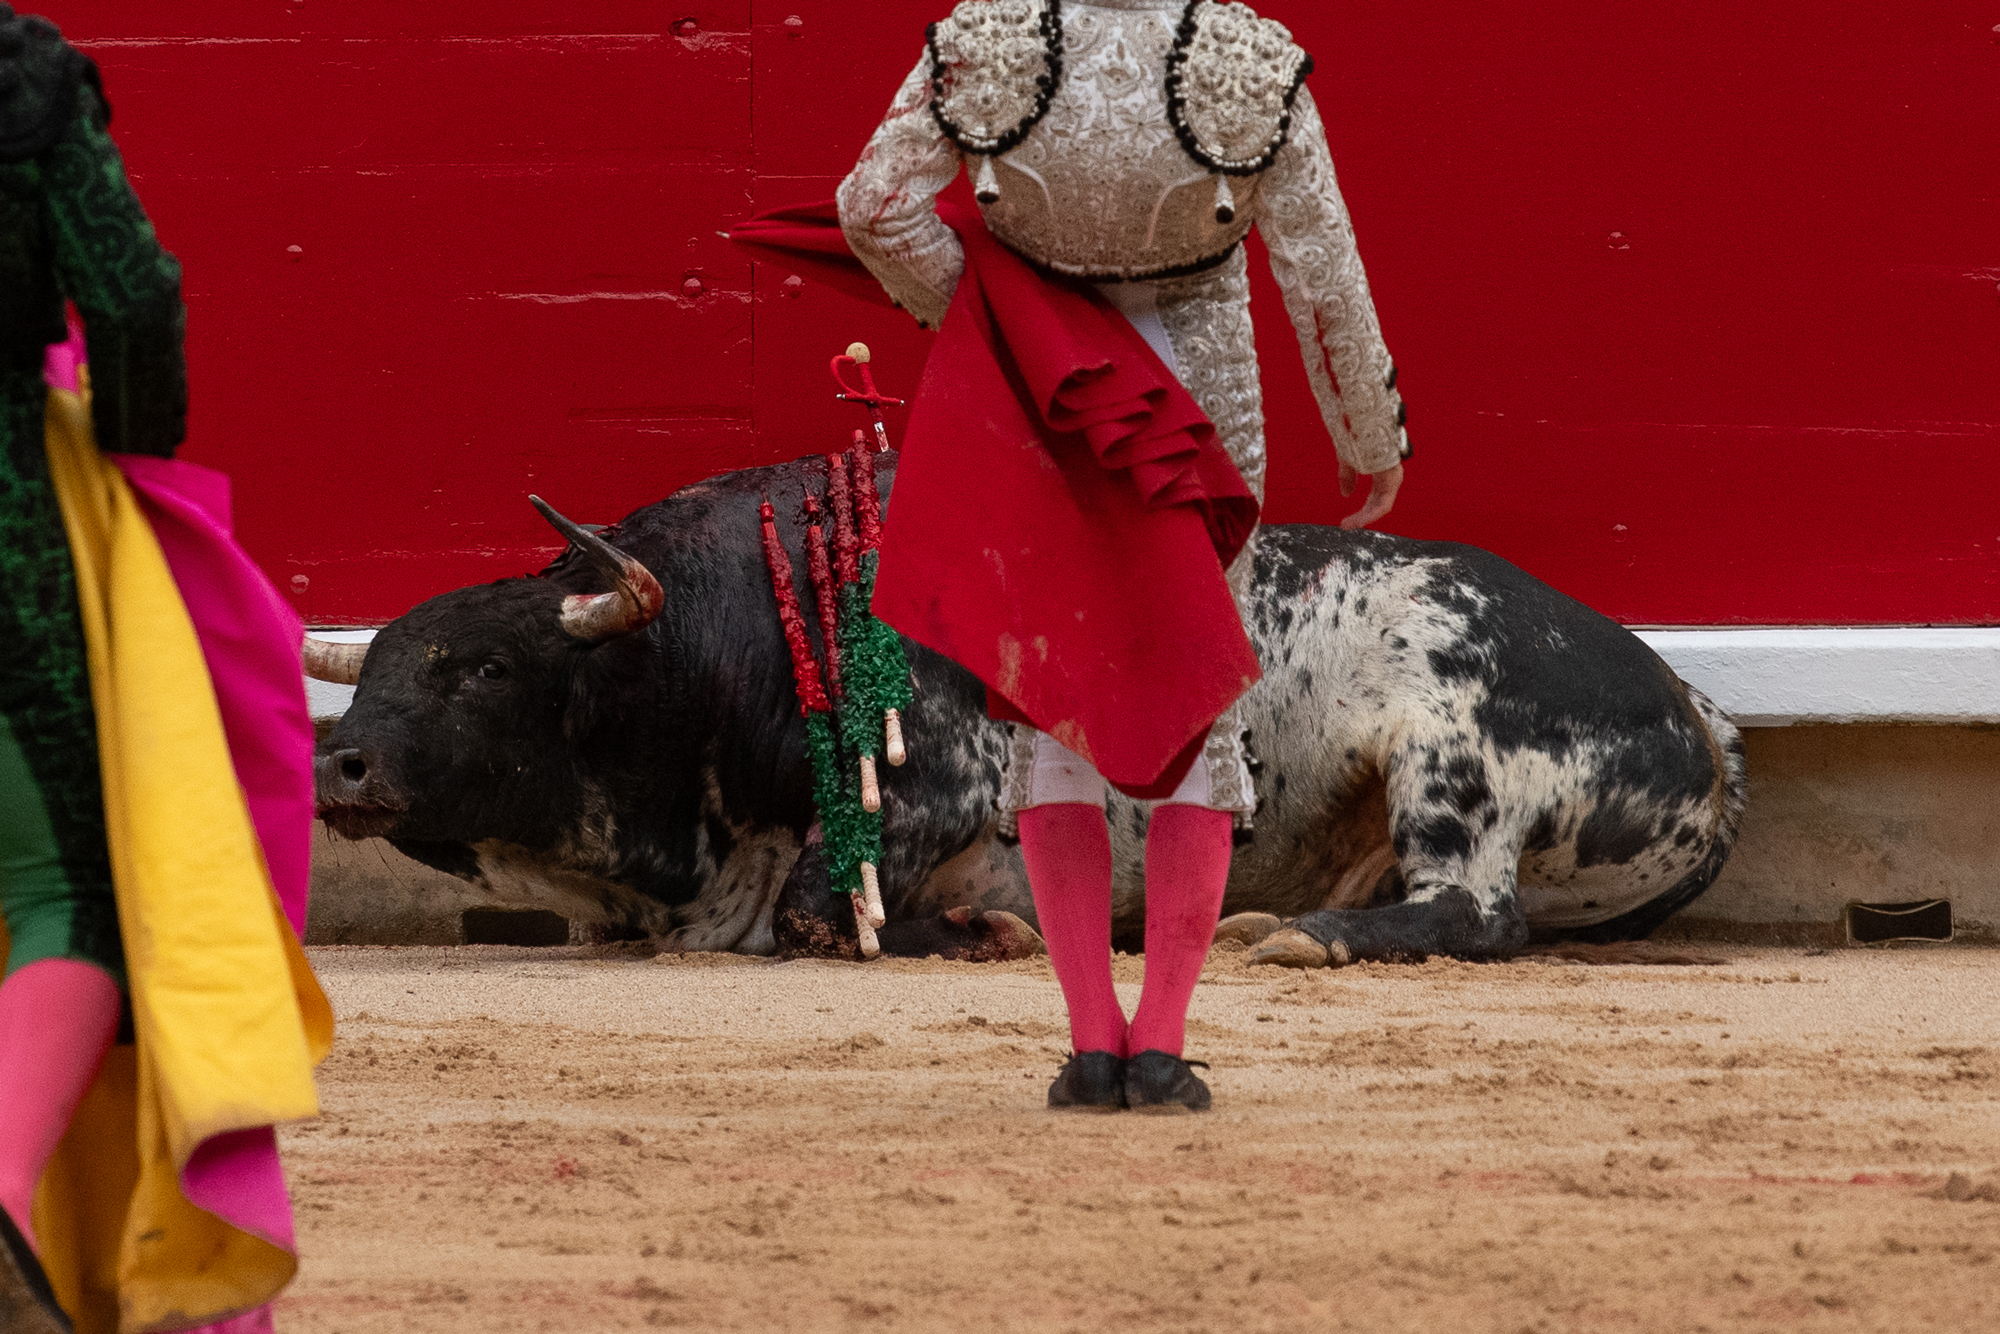 This is the face of suffering on the first day of bullfighting in San Fermín